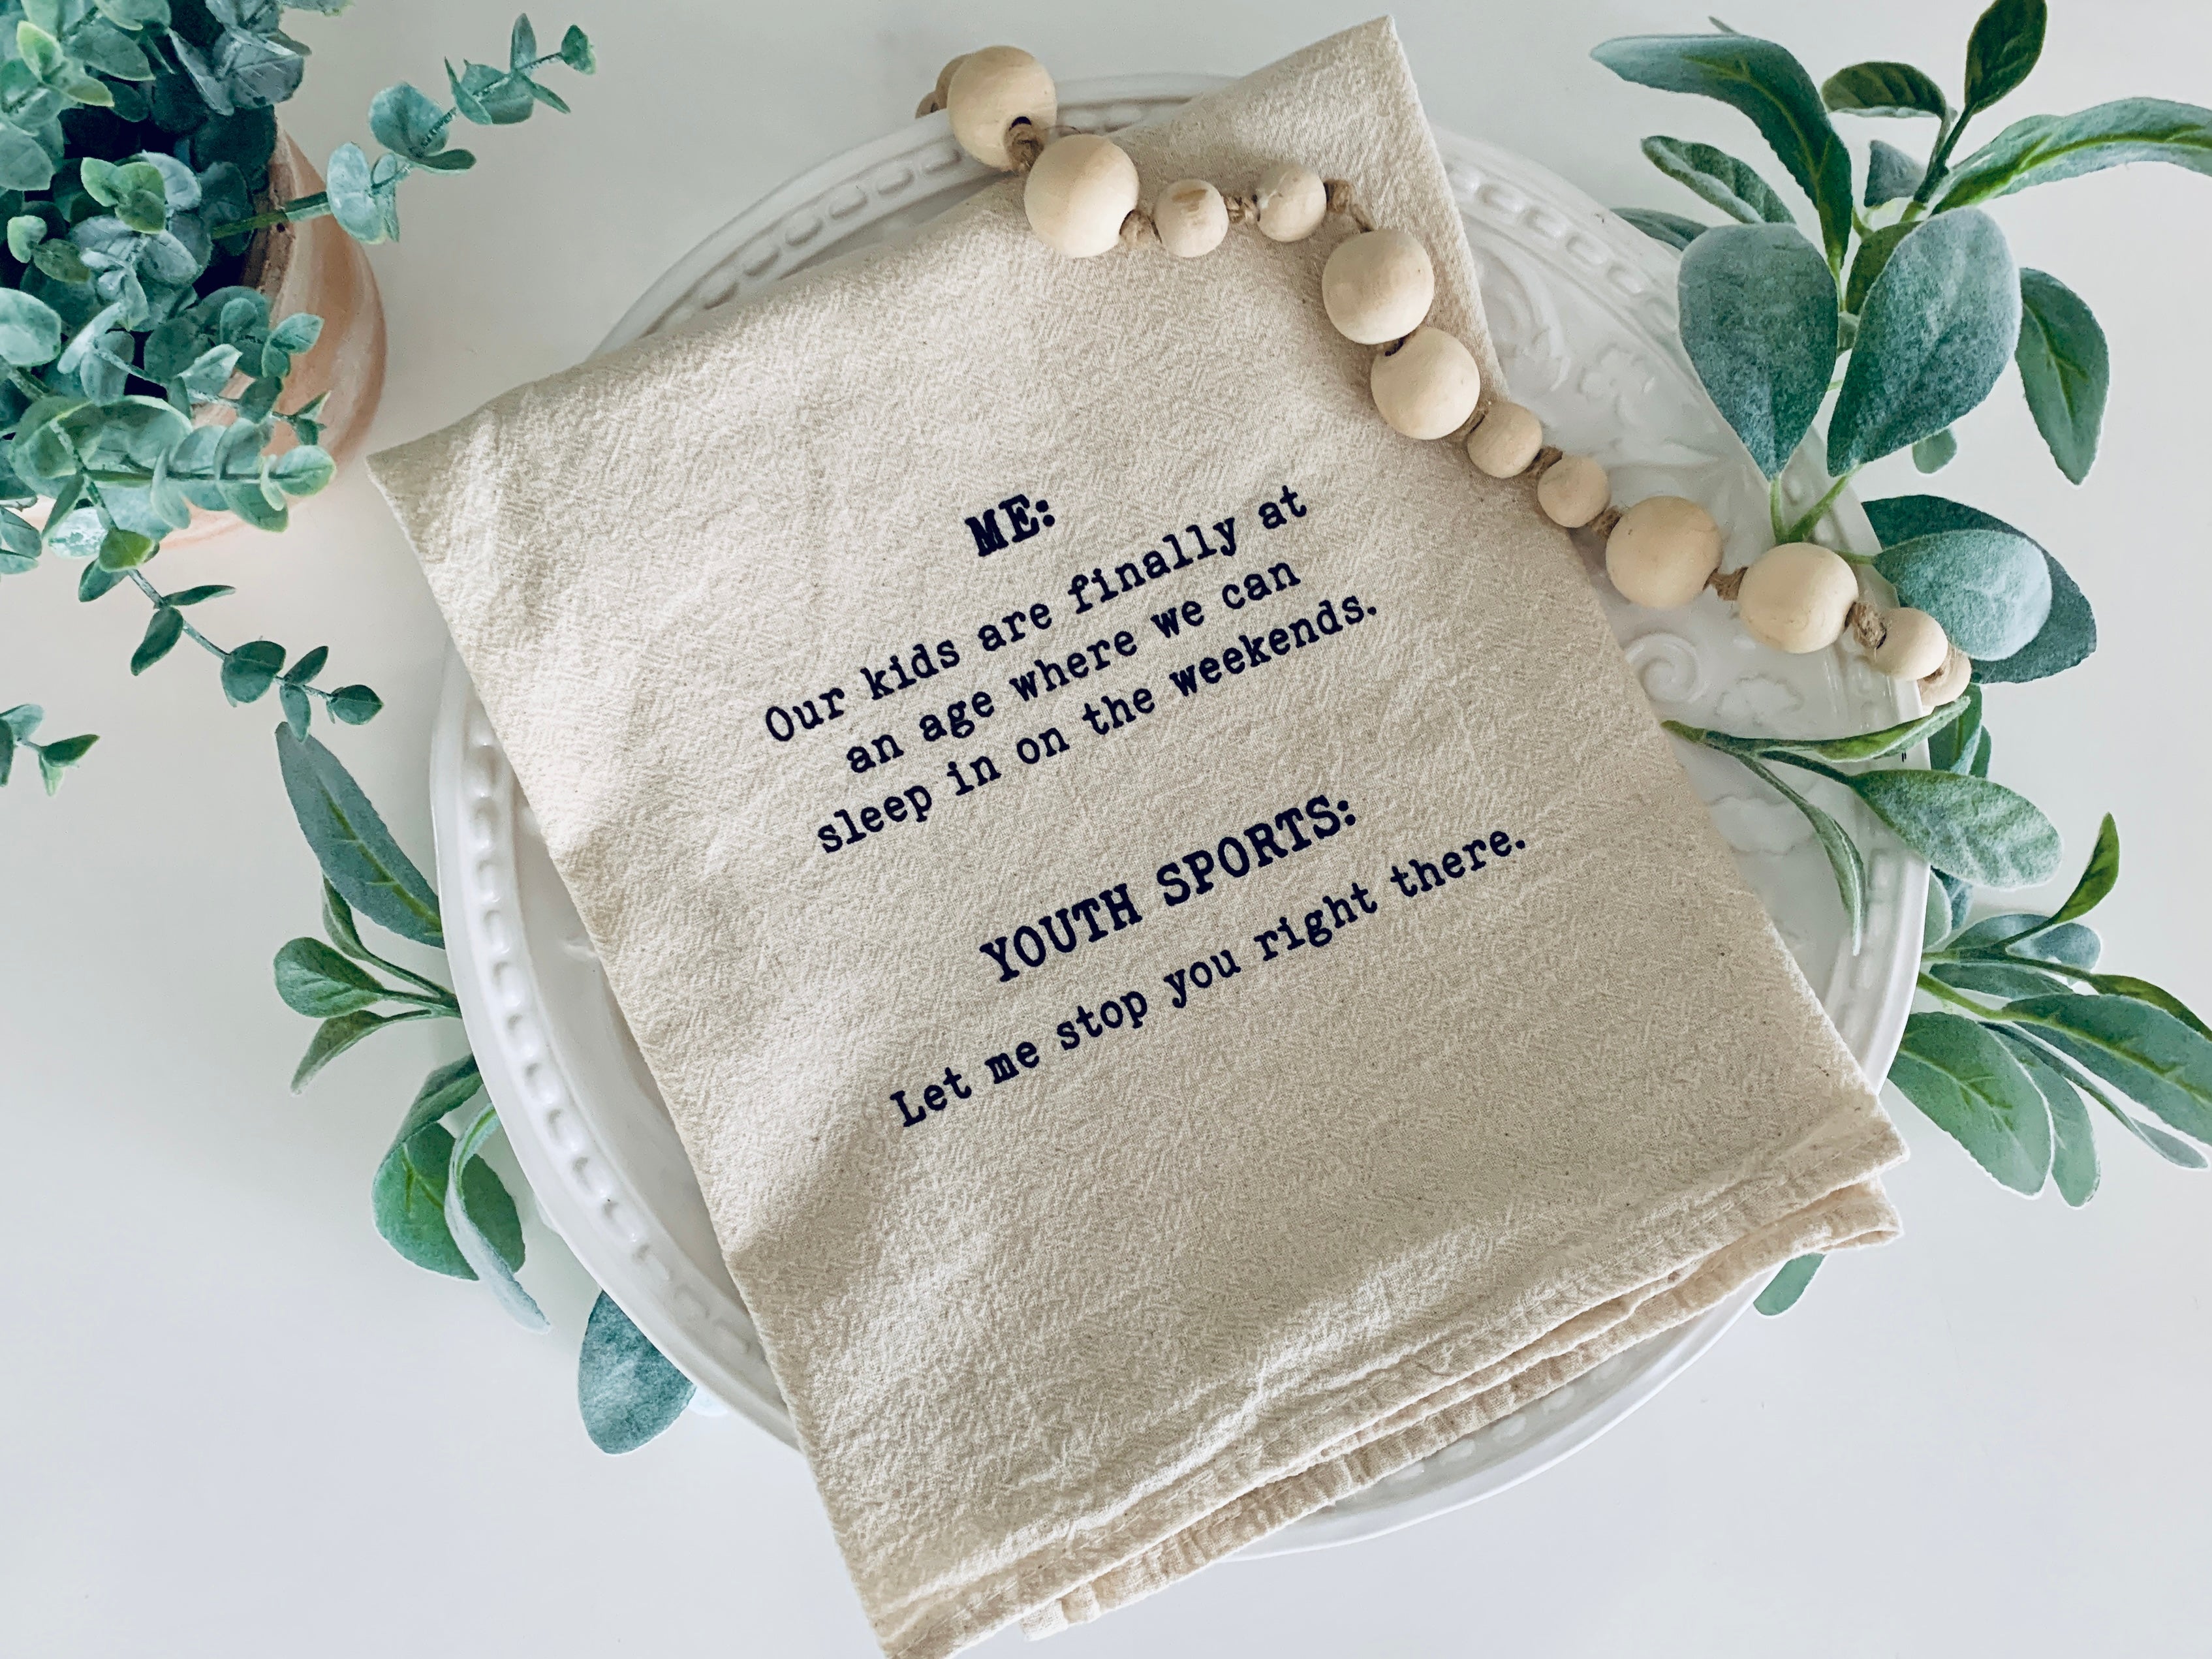 27 x 18 Sea You at the Beach Kitchen Towel - Wilford & Lee Home